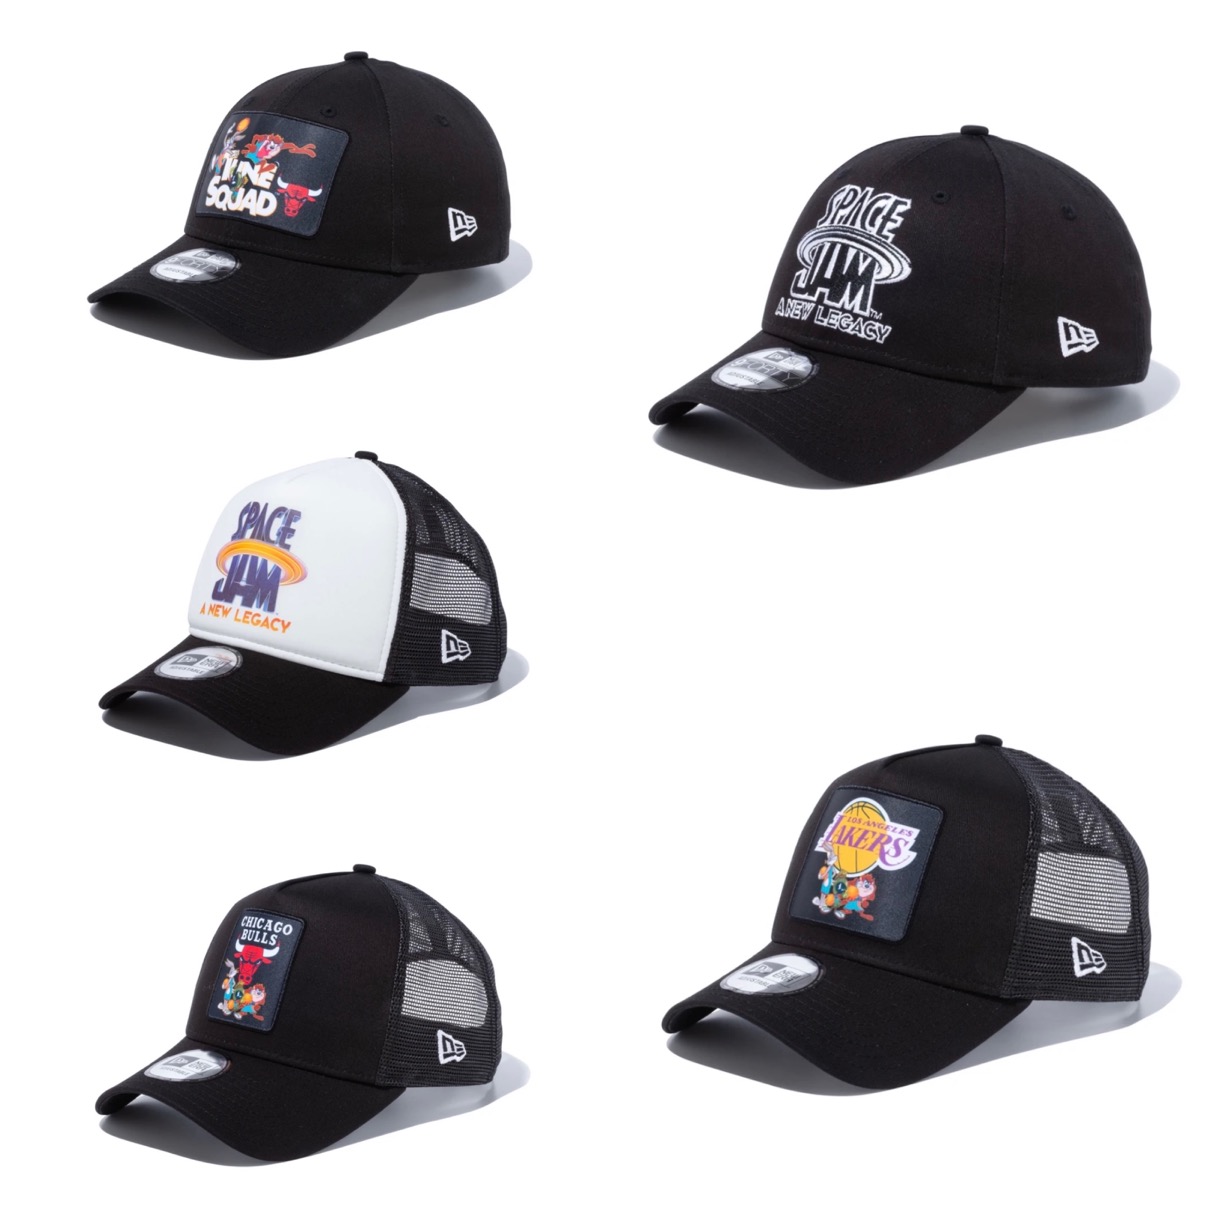 New Era®︎ × SPACE JAM A NEW LEGACY】コラボキャップが国内7月28日に 